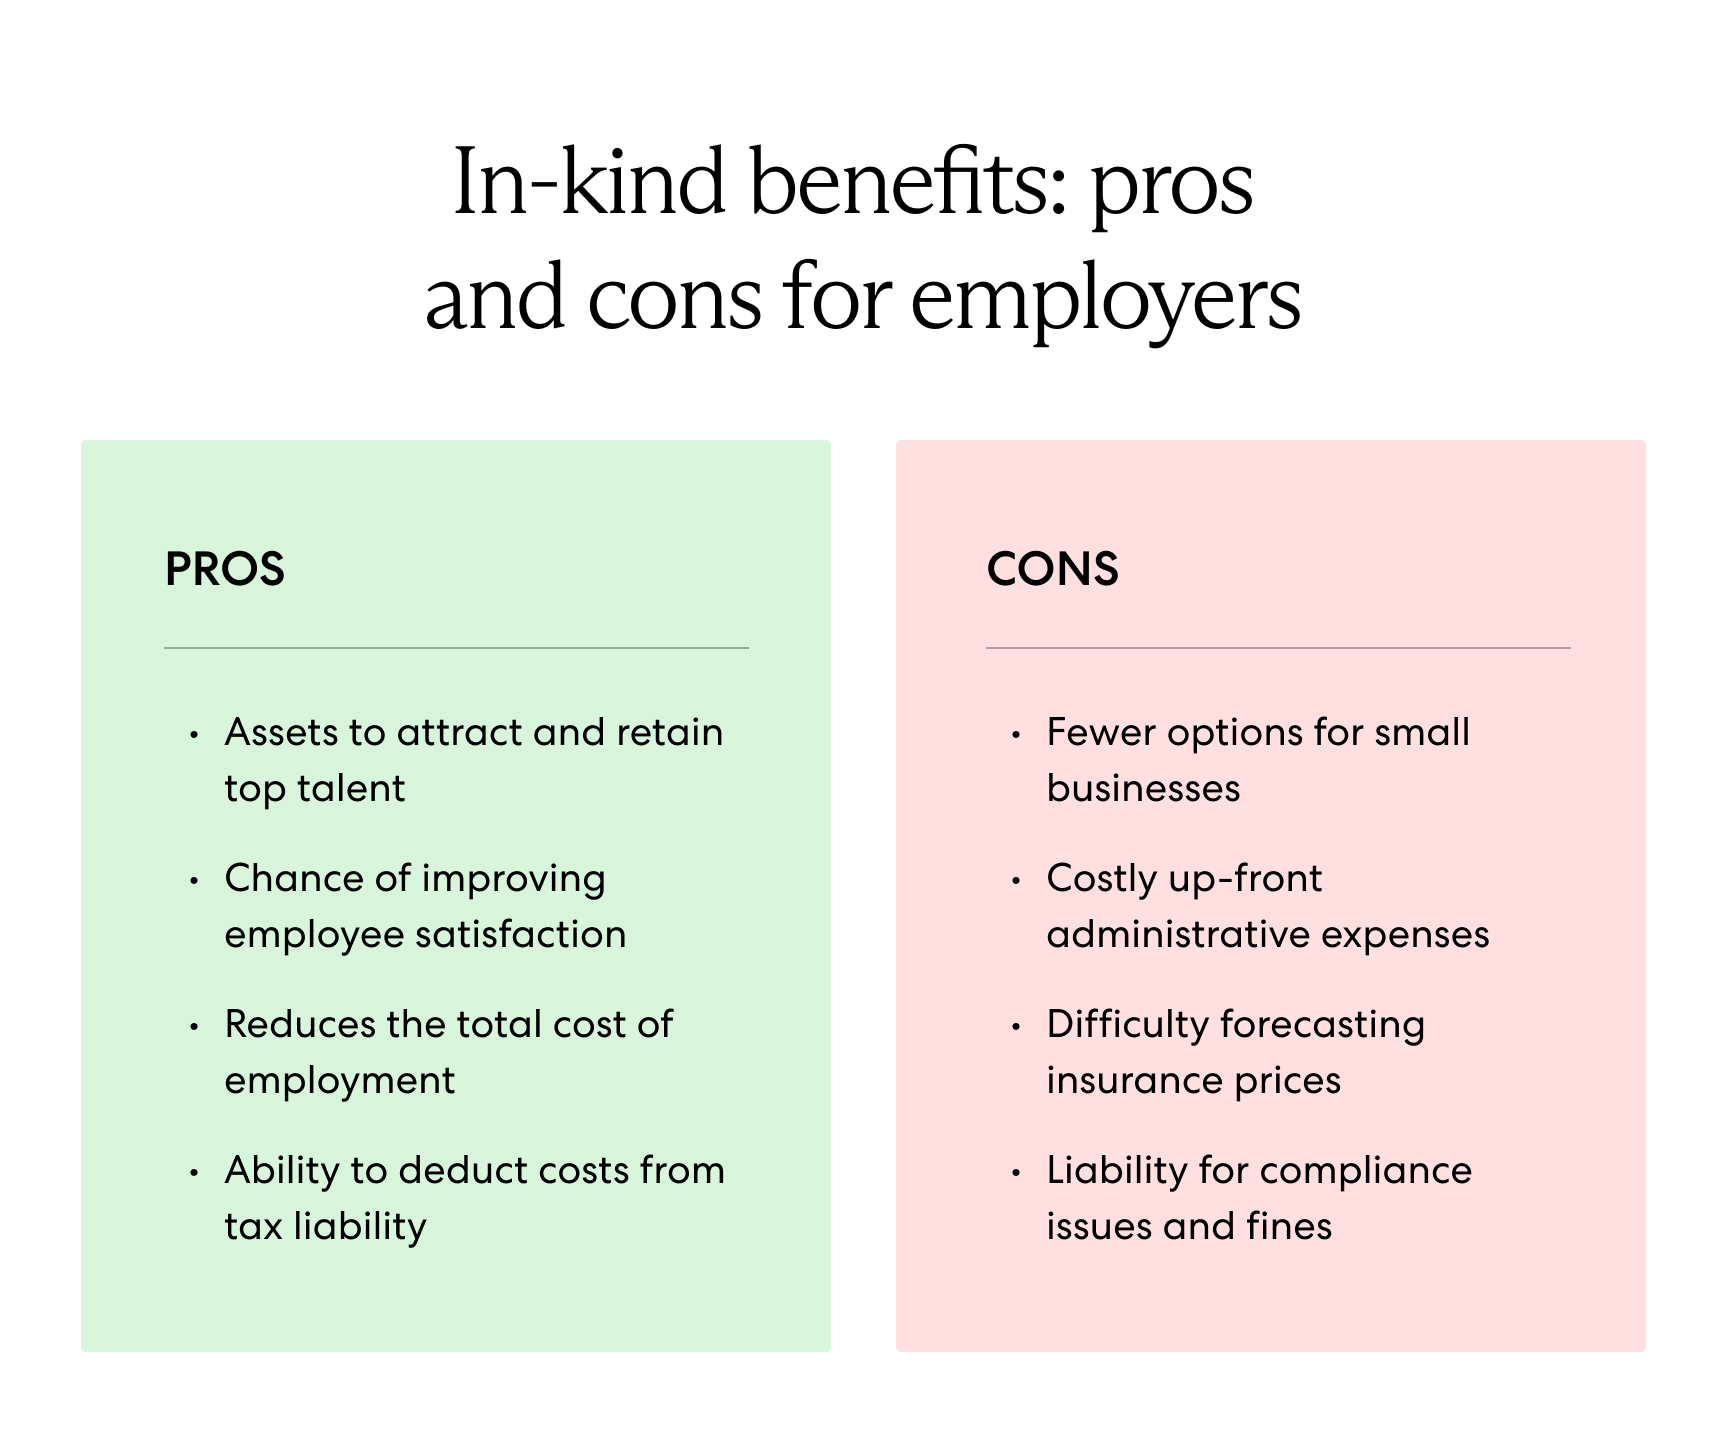 Pros and cons of in-kind benefits for employers.